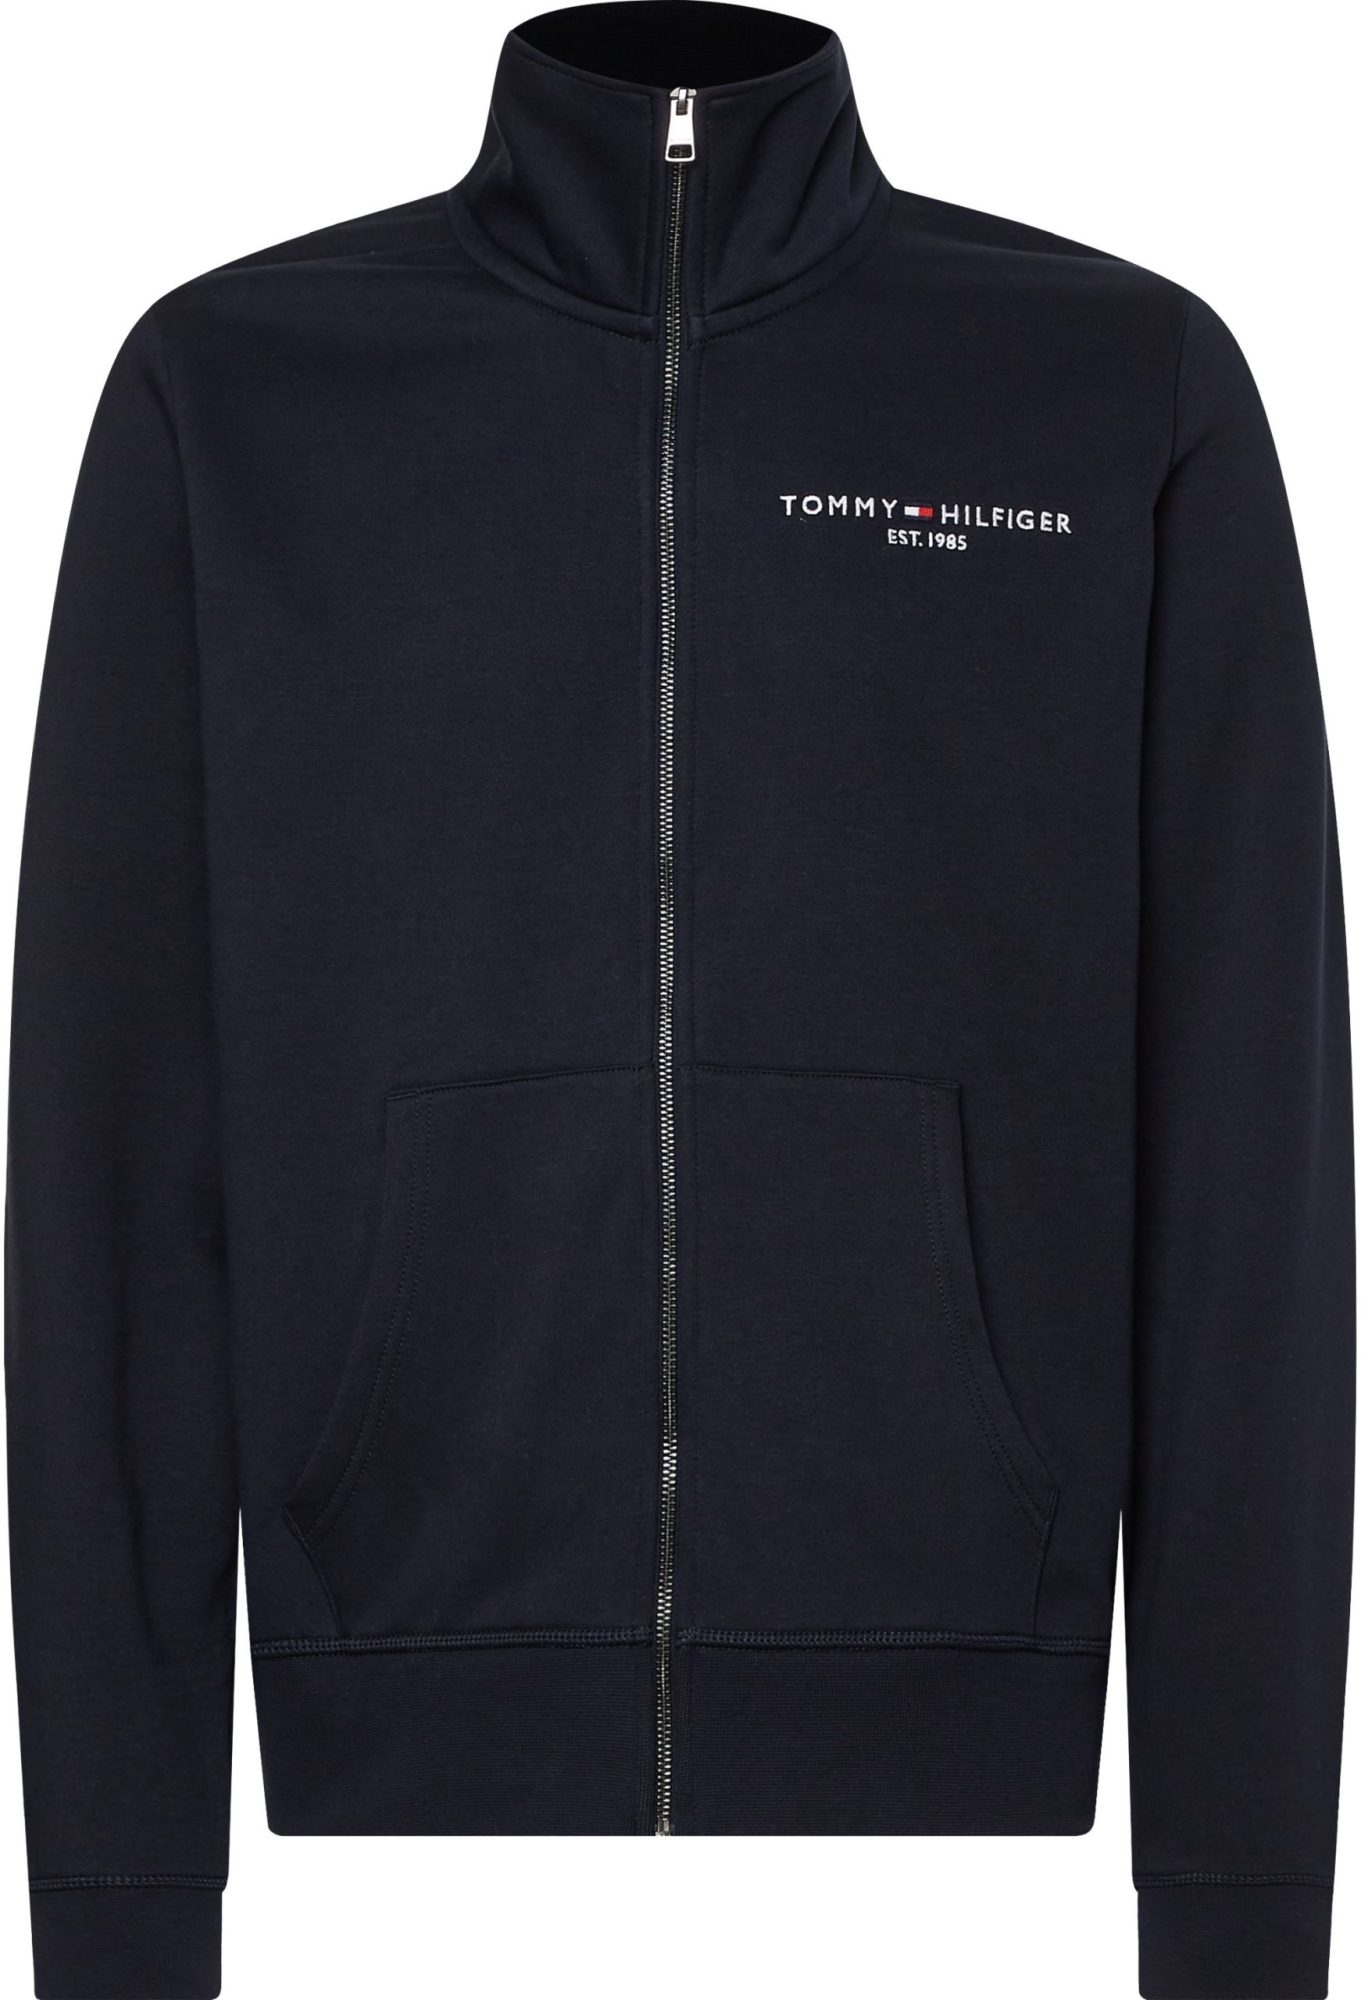 TOMMY HILFIGER LOGO ZIP COLLAR | Morans Menswear and Clothing, Thurles ...